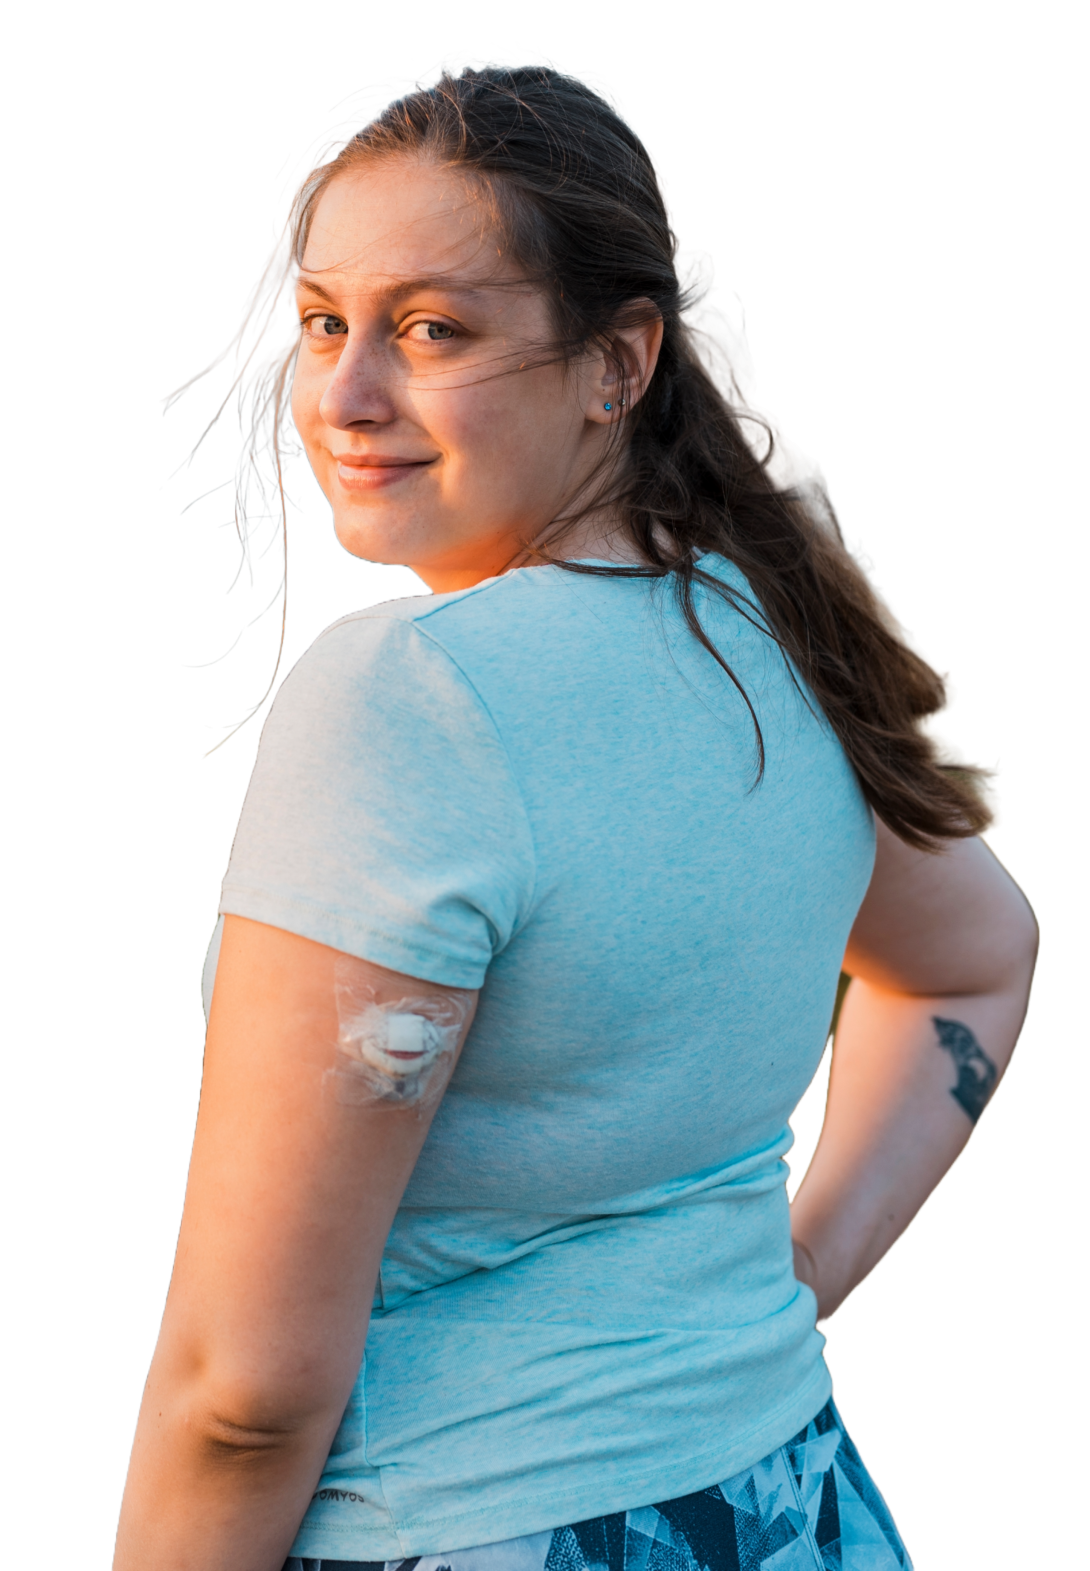 Smiling woman with diabetes monitor patch on arm